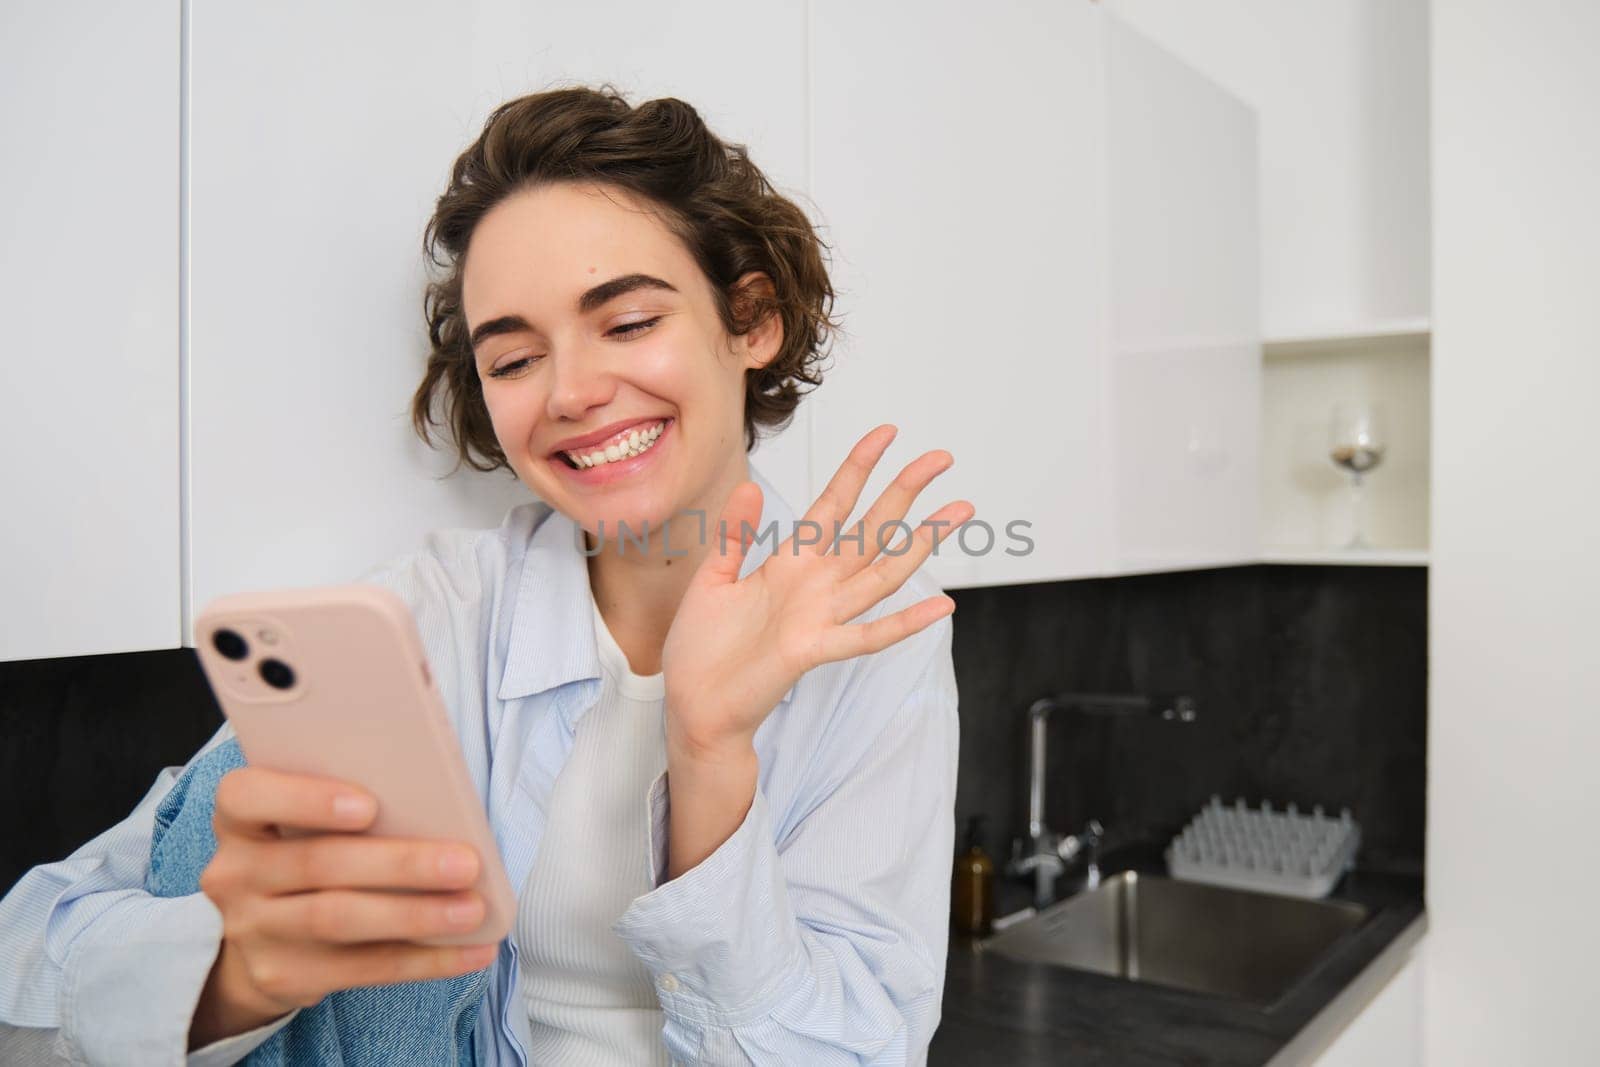 Portrait of friendly smiling brunette woman, sitting at home in kitchen, looking at her smartphone camera, video chats and waves at mobile phone, saying hello to someone.